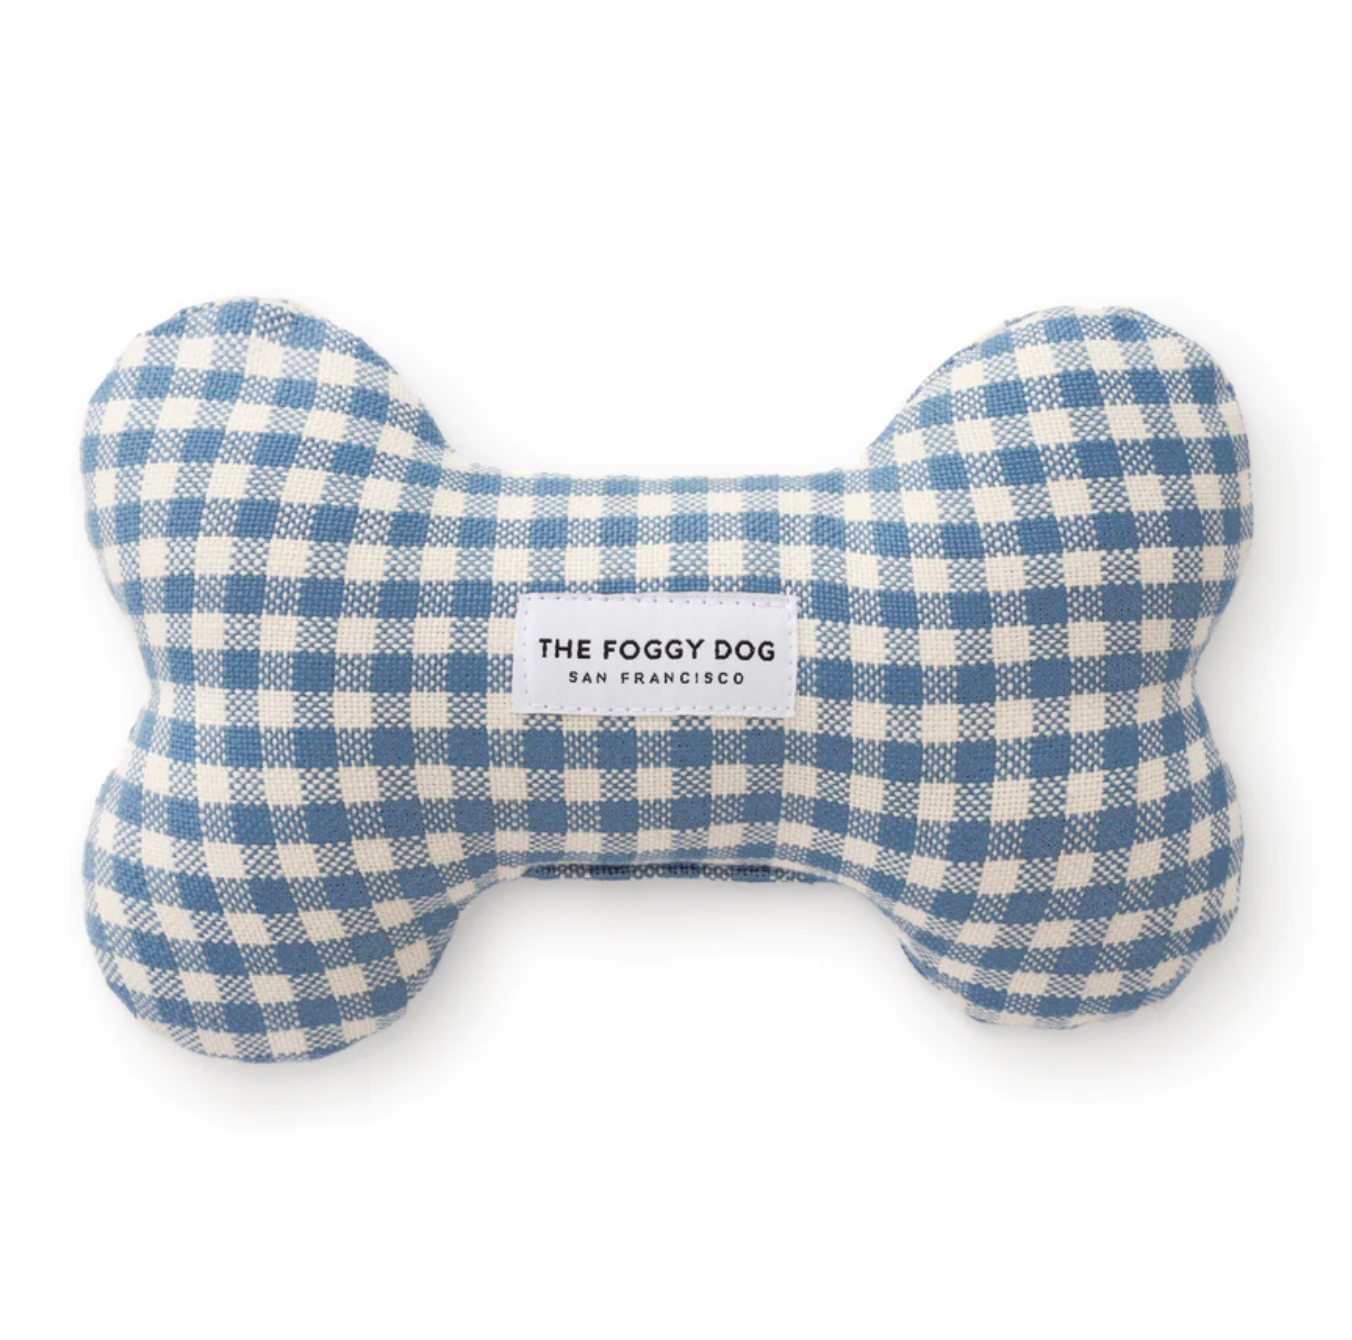 Cloud Blue Gingham Dog Squeaky Toy